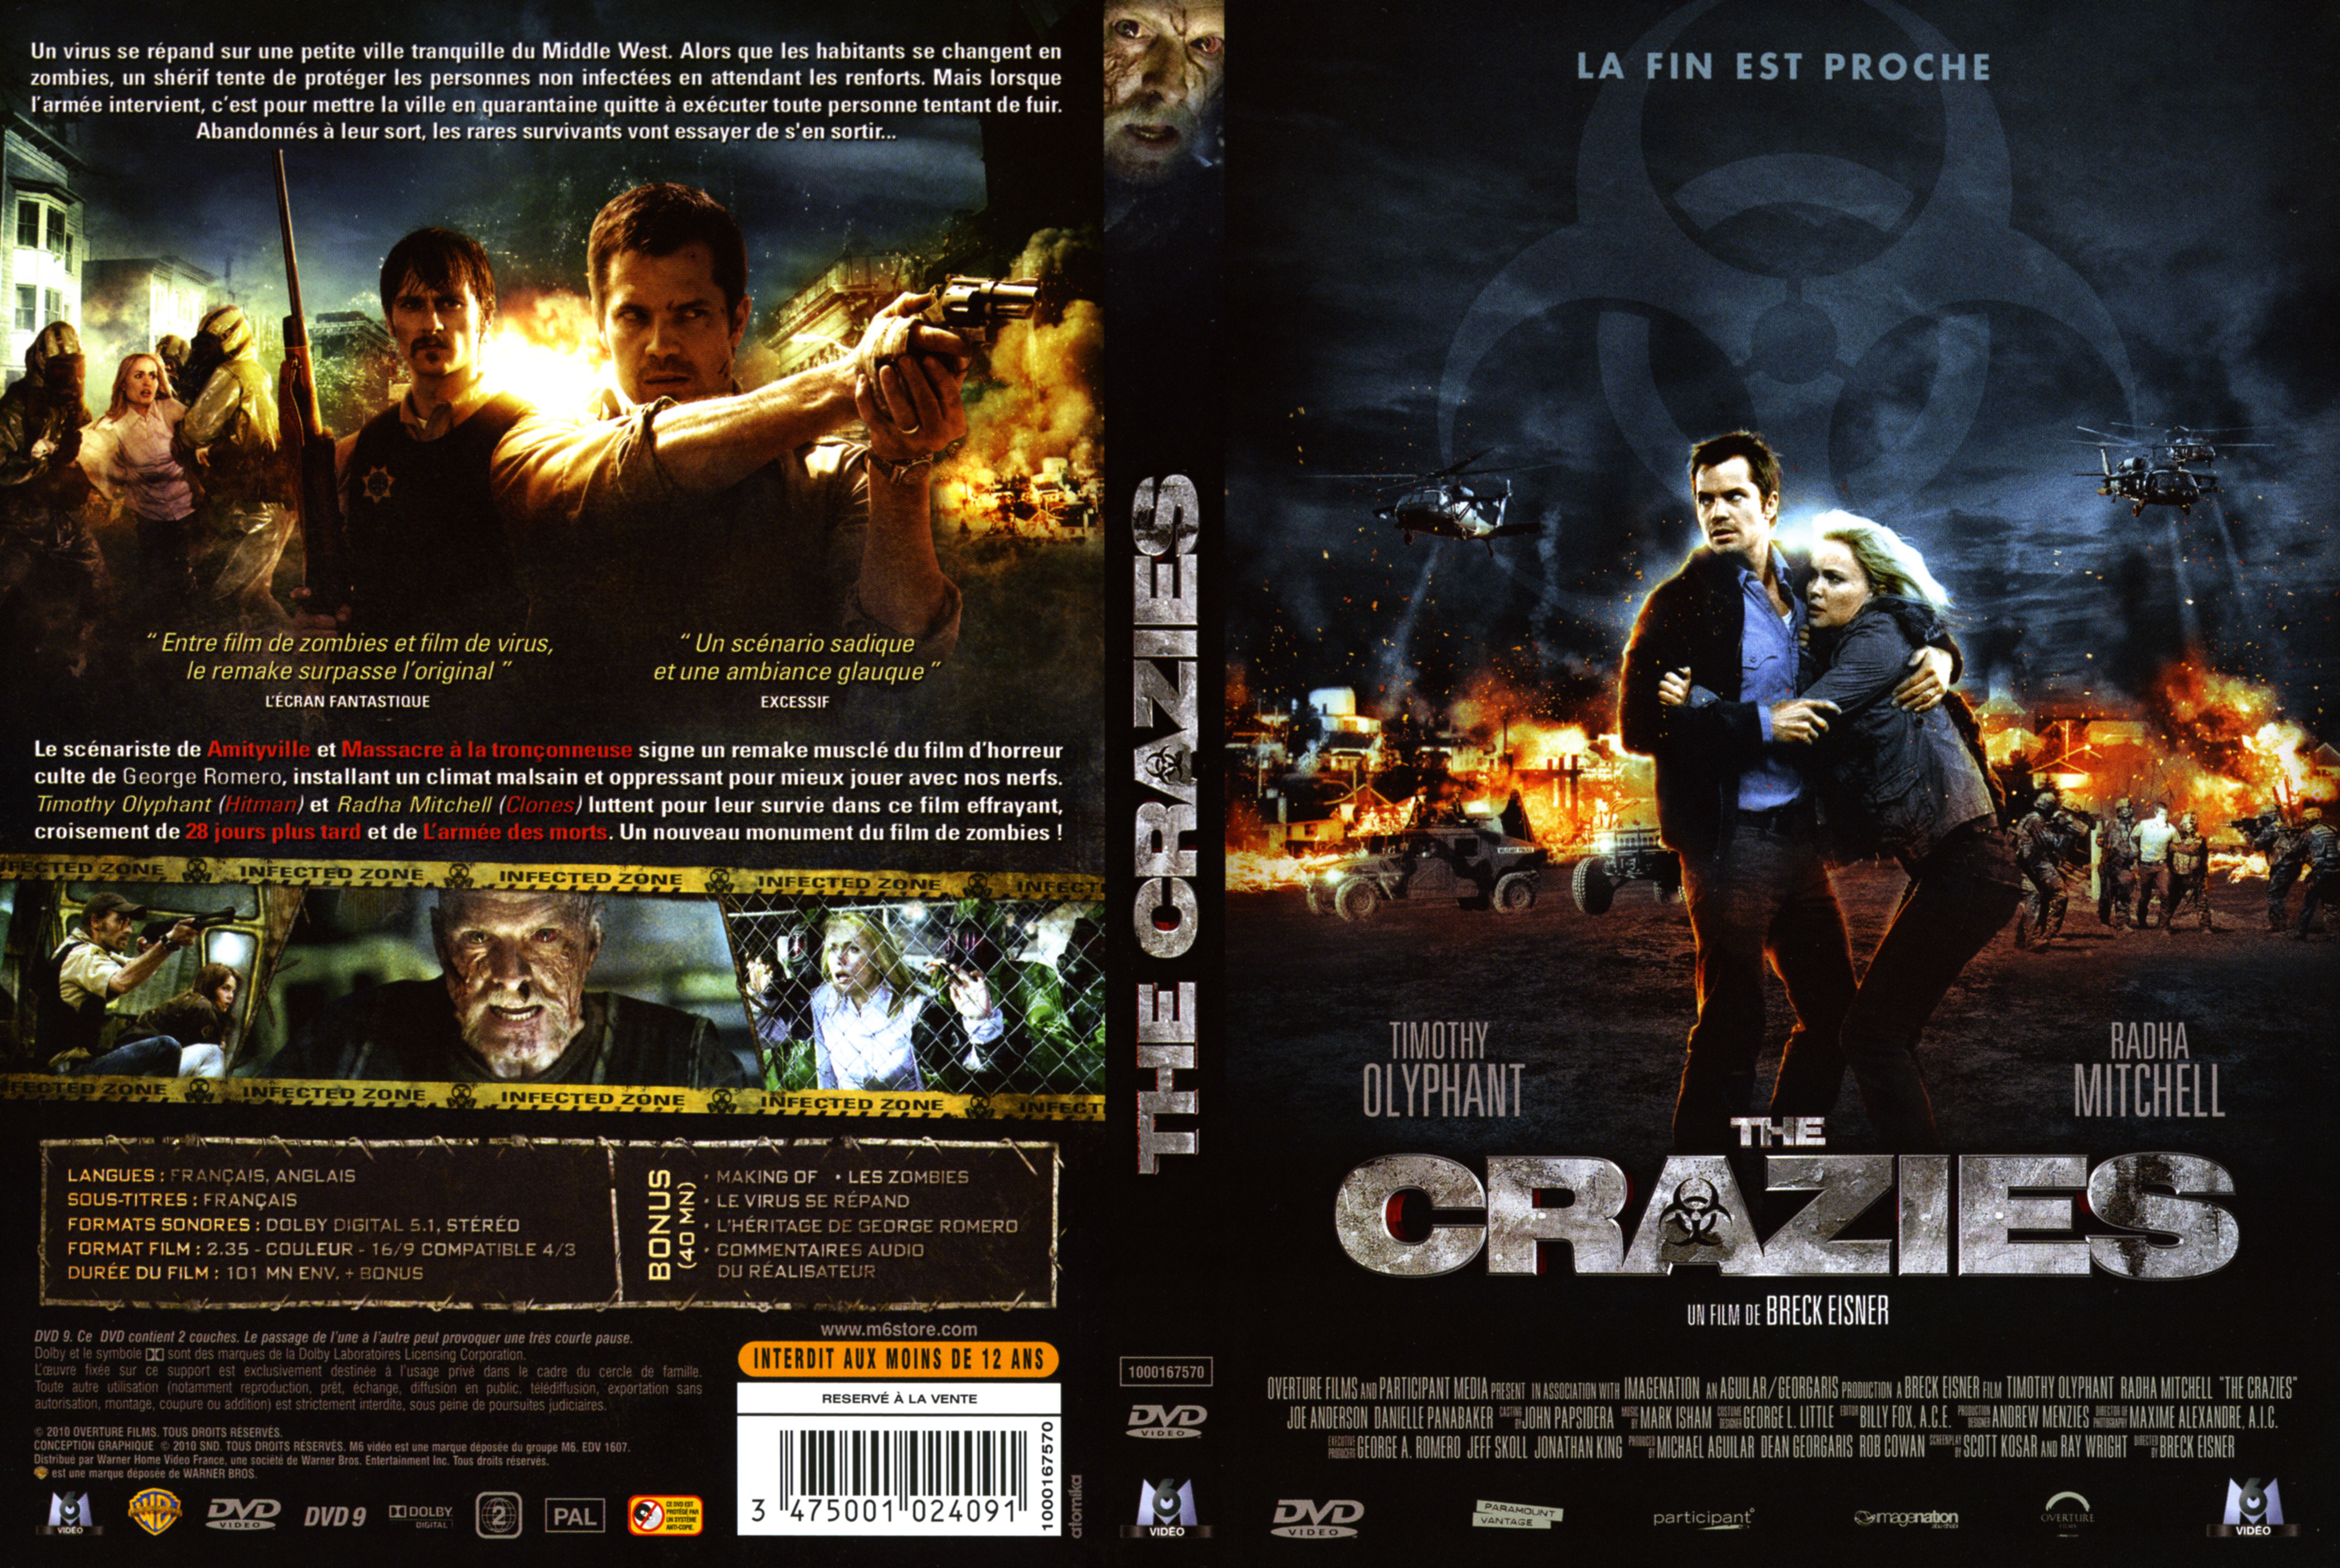 Jaquette DVD The crazies (2010)